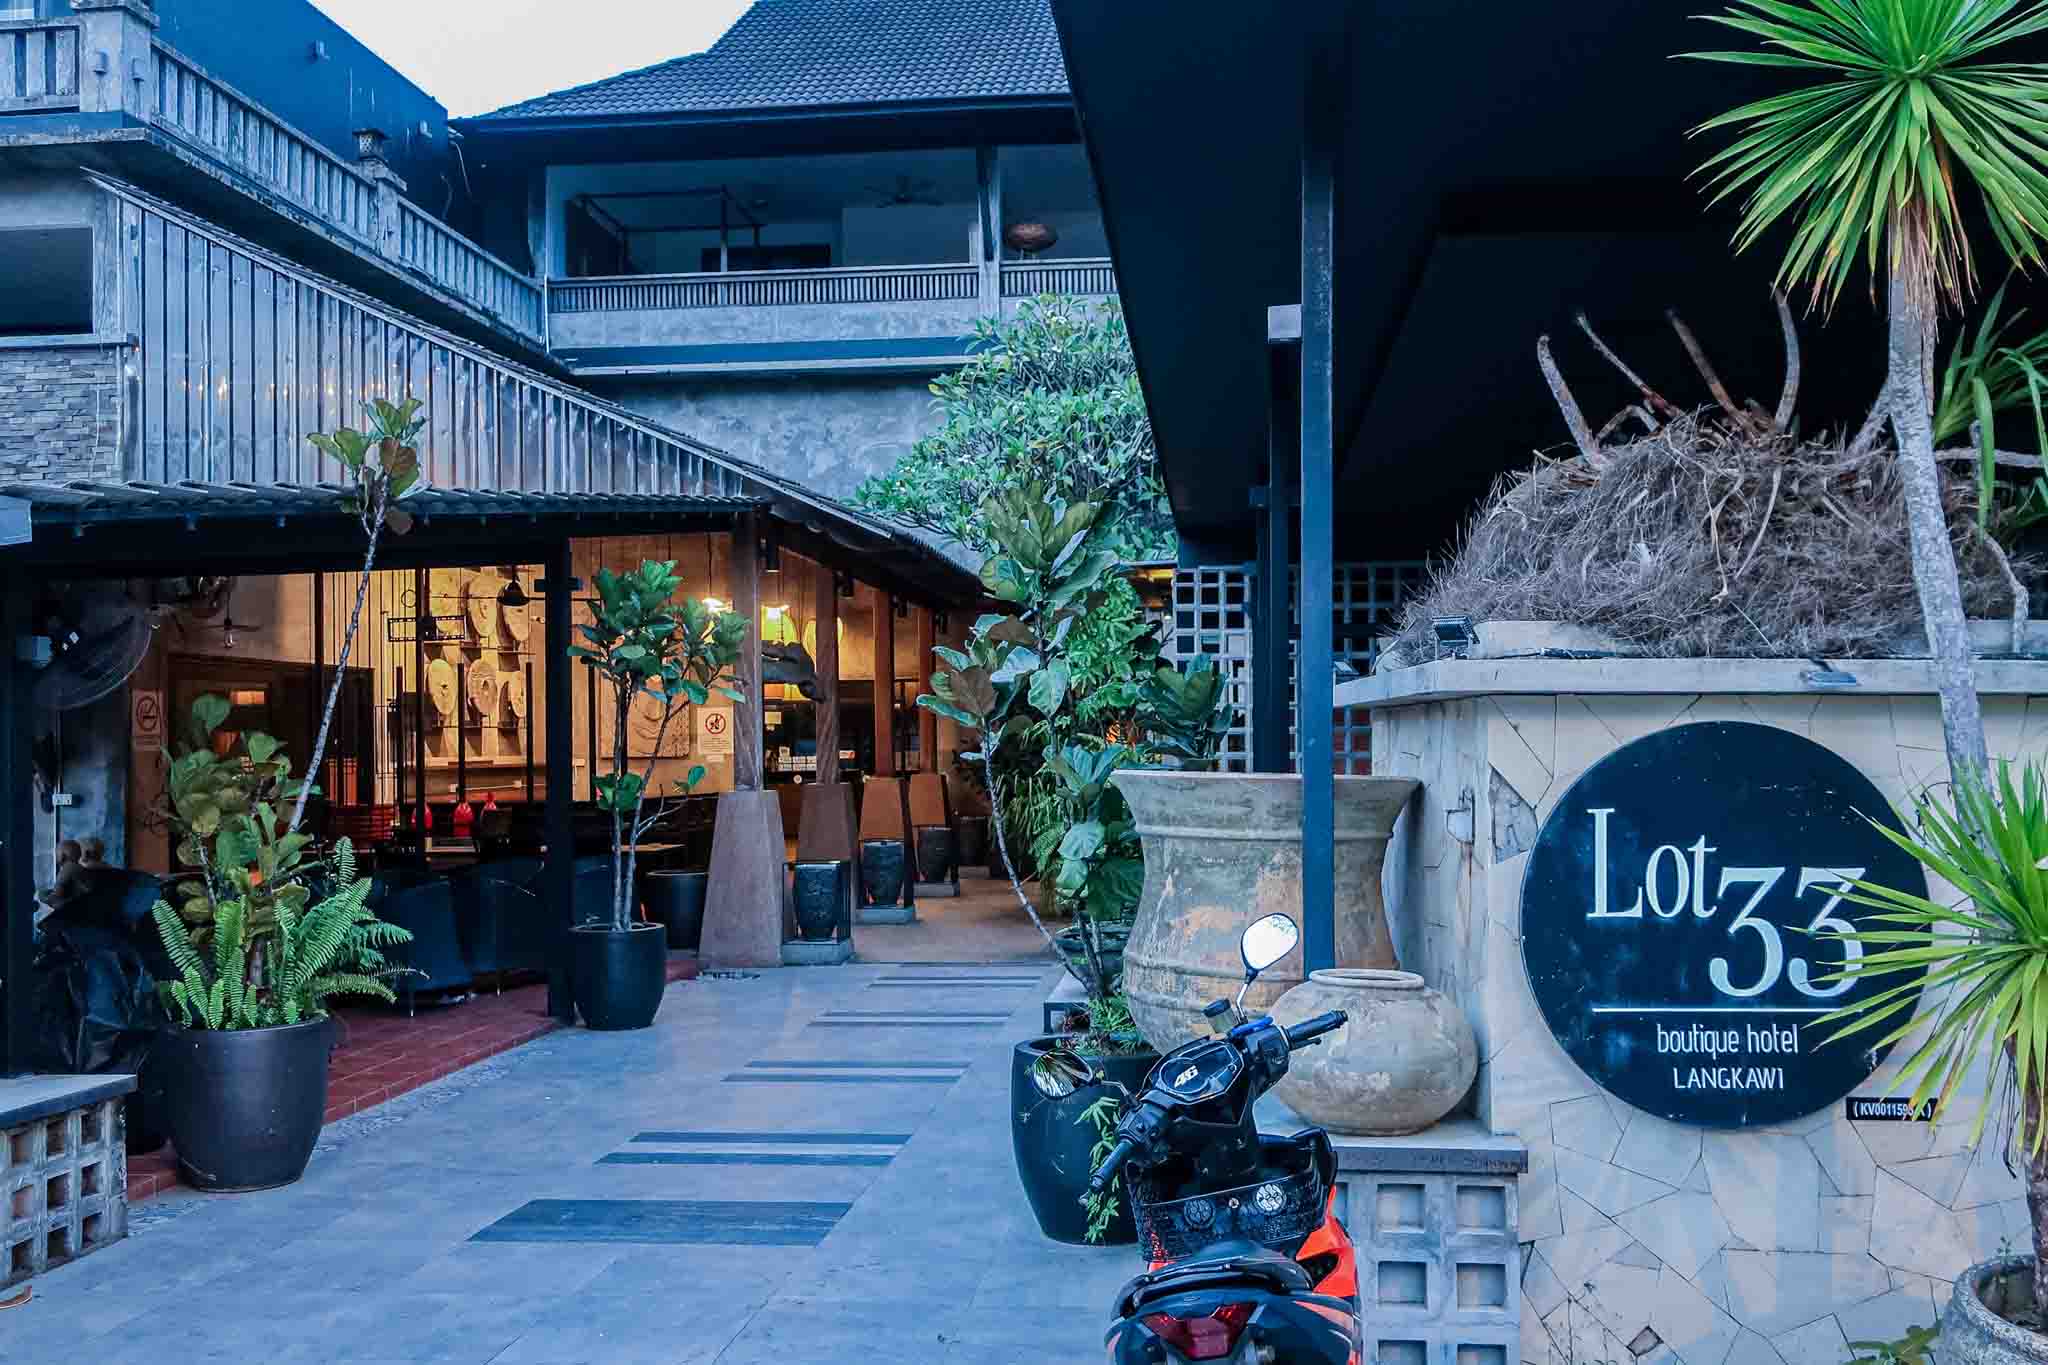 Lot 33 Boutique Hotel Review in Langkawi